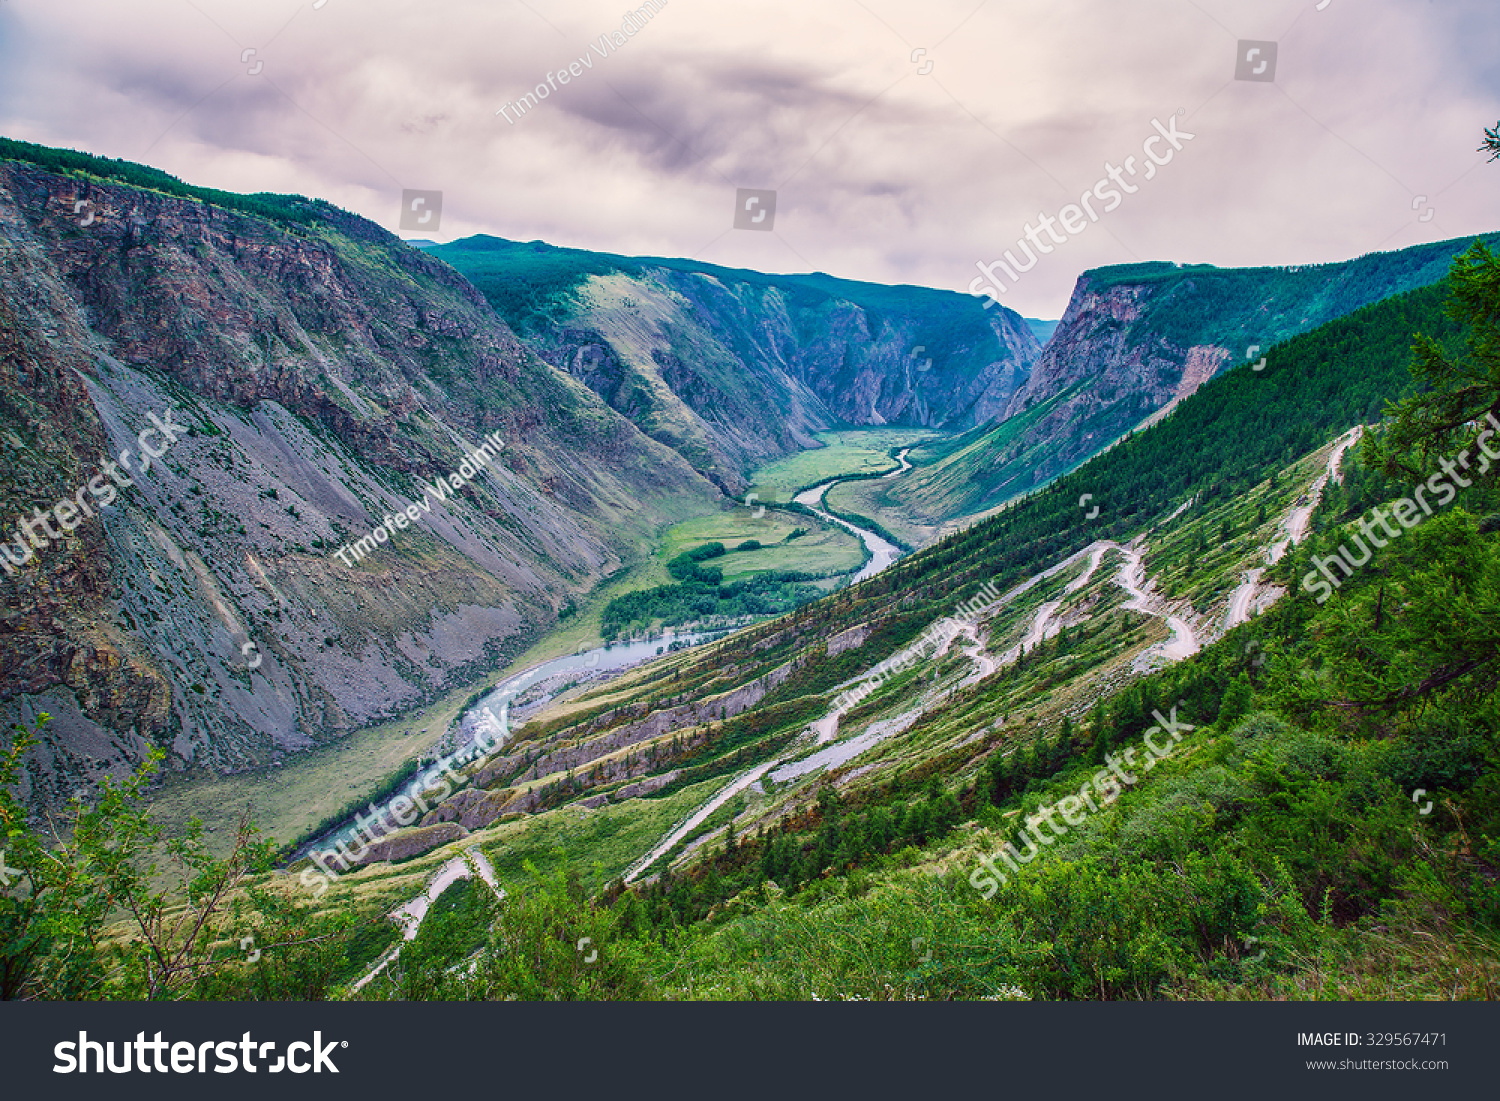 pass in a mountain valley with a river #329567471